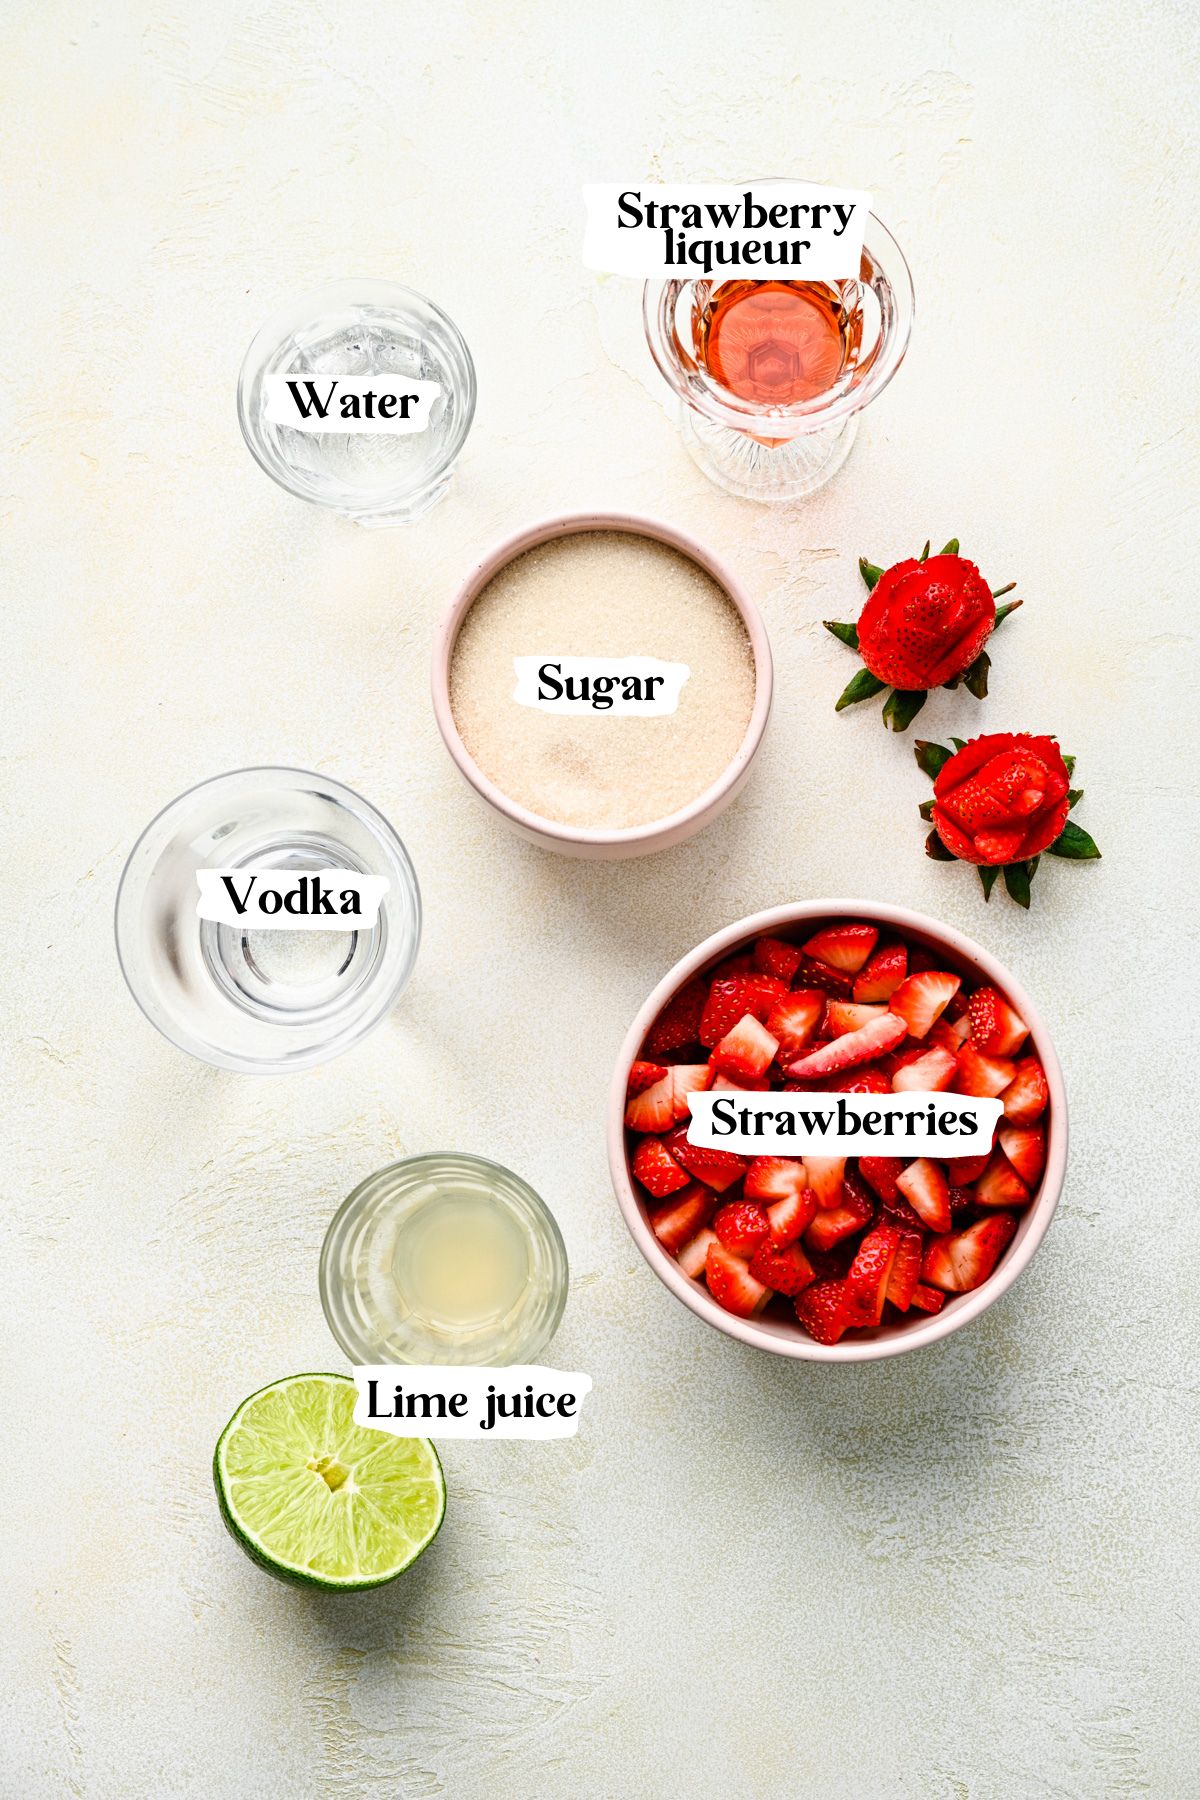 Overhead view of strawberry martini ingredients including vodka and lime juice.